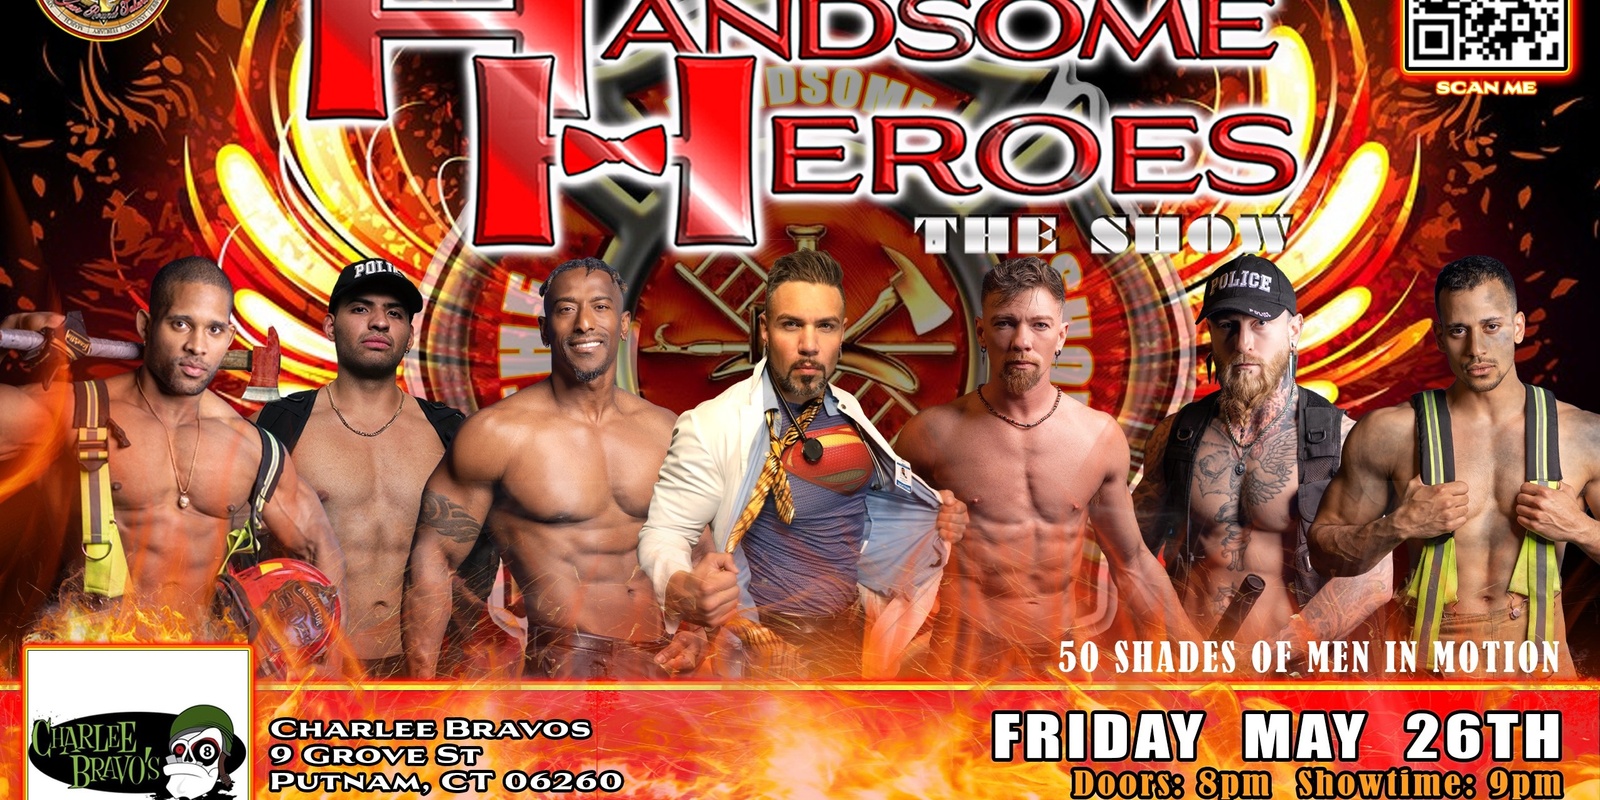 Putnam, CT - Handsome Heroes The Show: The Best Ladies Night' Out of All Time!